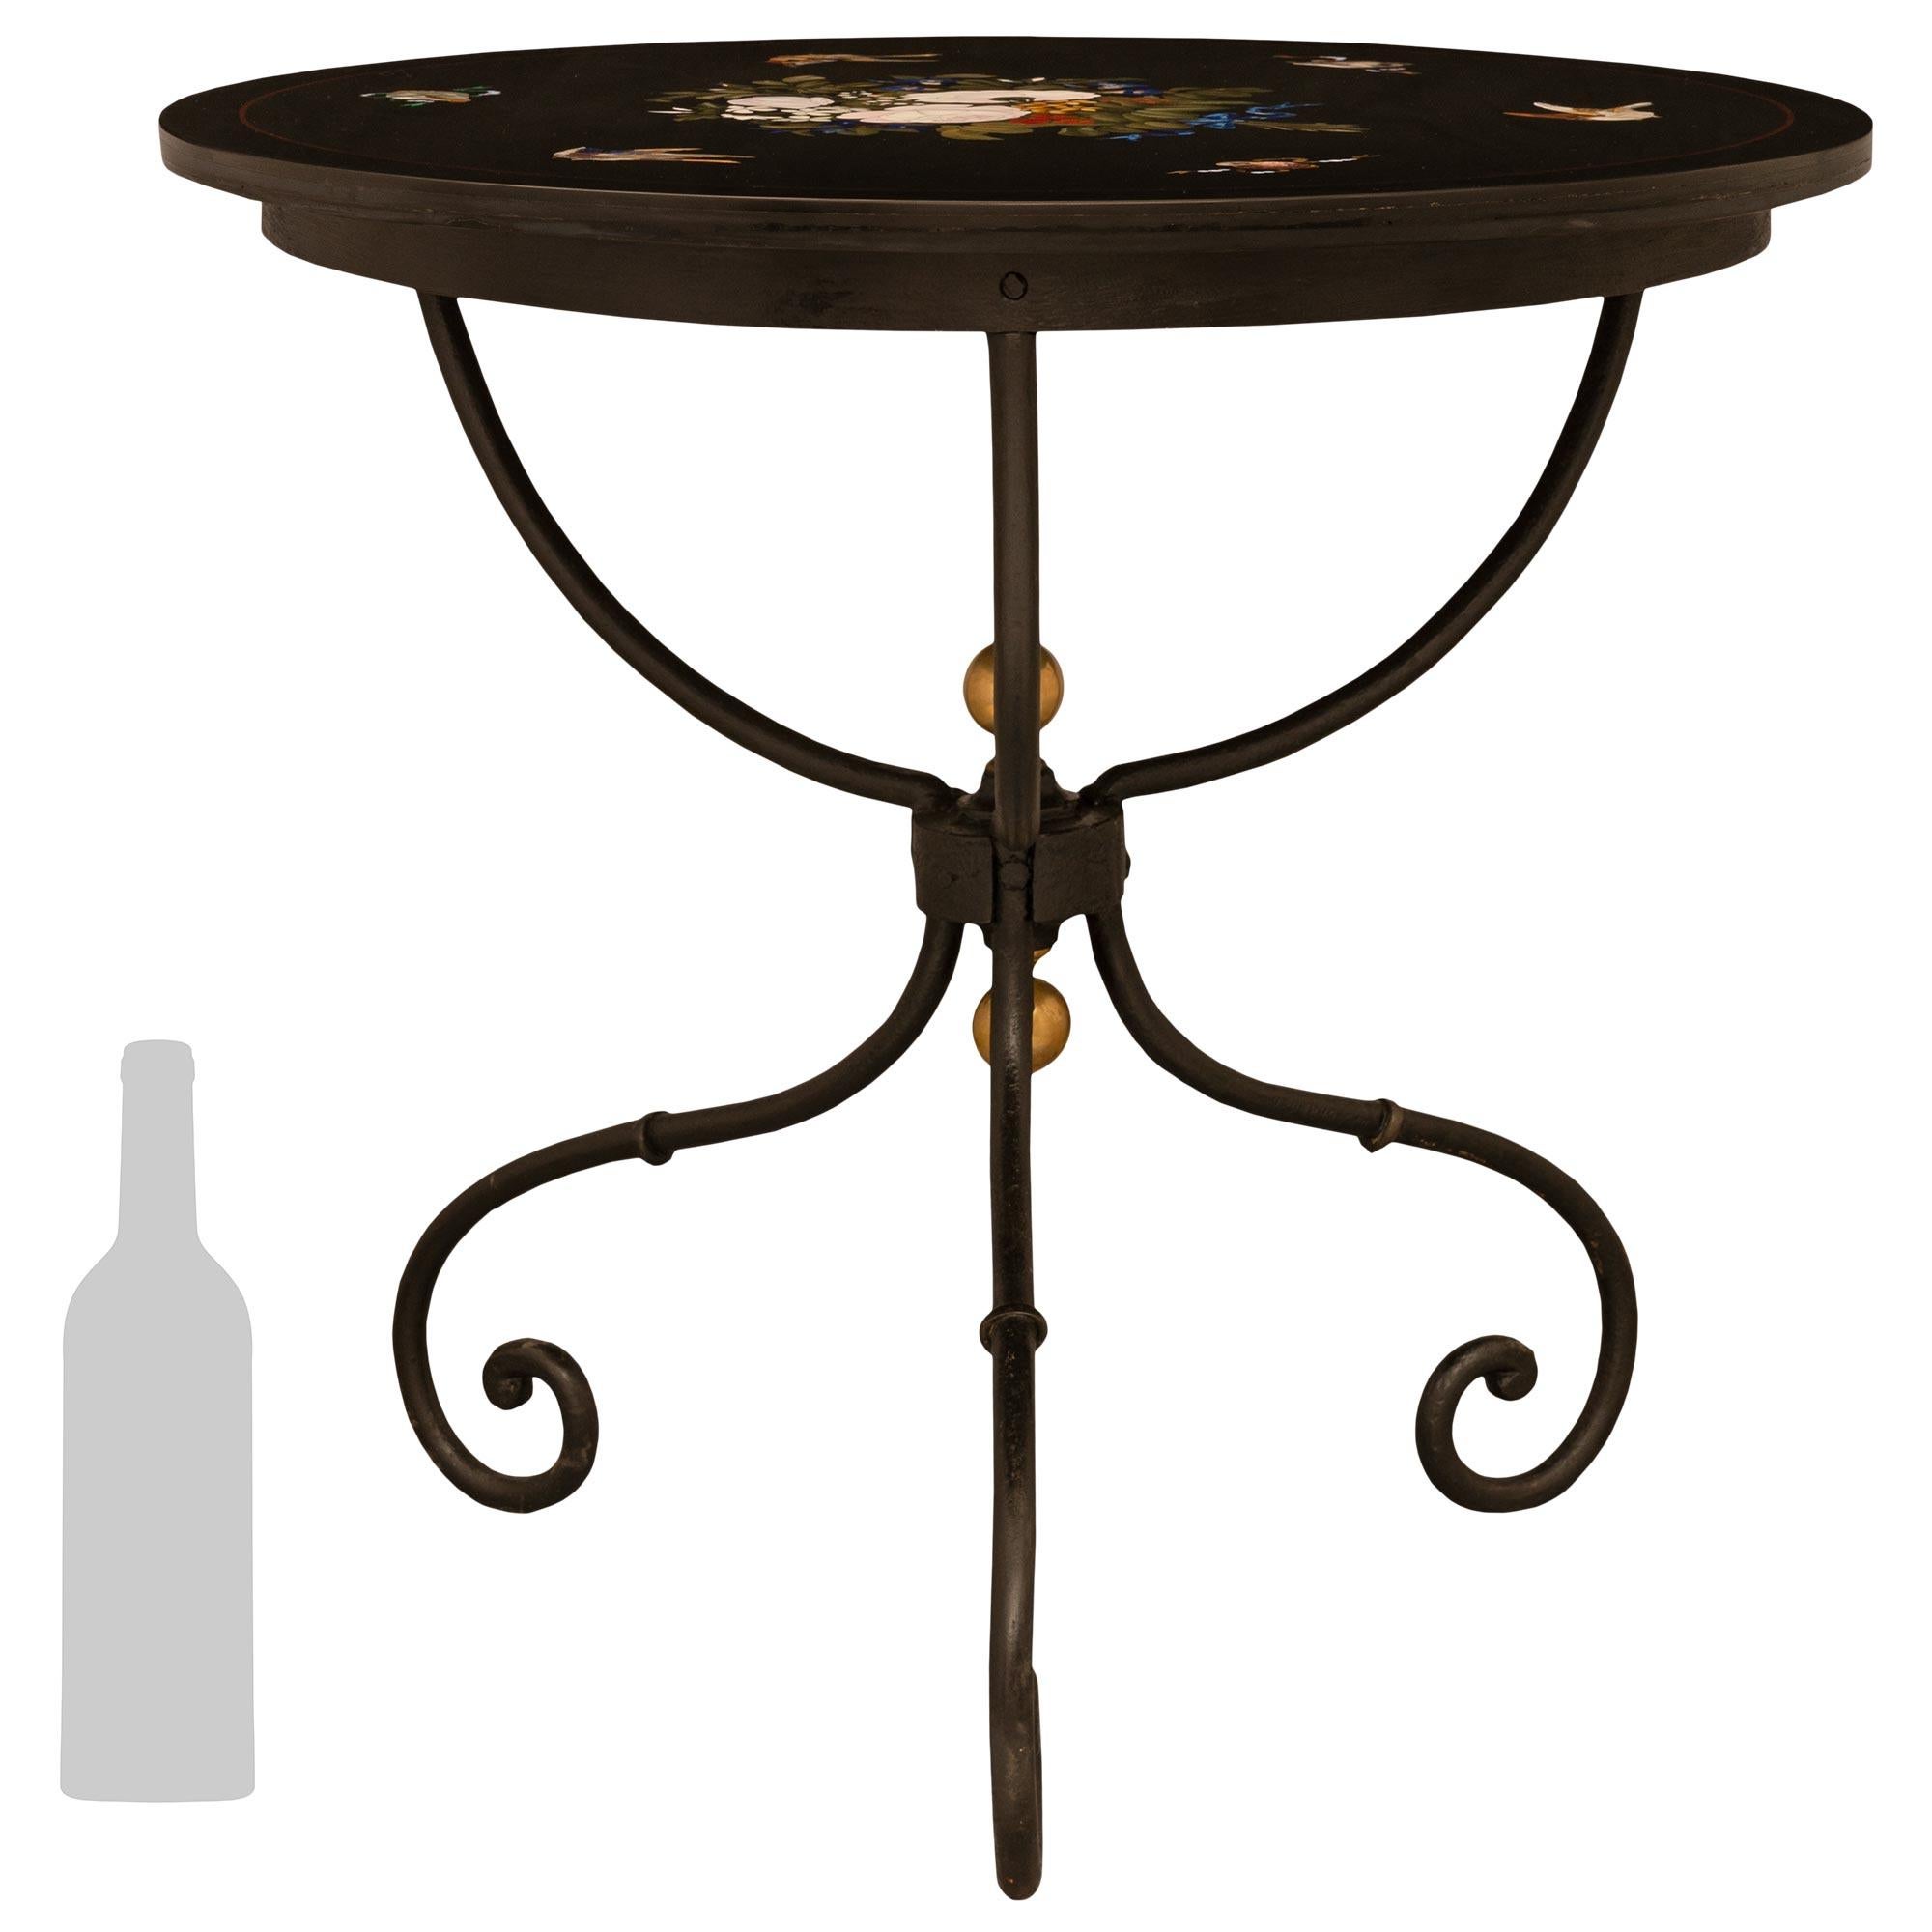 A very decorative Italian 19th century Florentine st. Wrought Iron, brass and marble side table. The table is raised on a scrolled Wrought Iron base joined in the center by a handsome Wrought Iron stretched adorned with a top and bottom brass ball